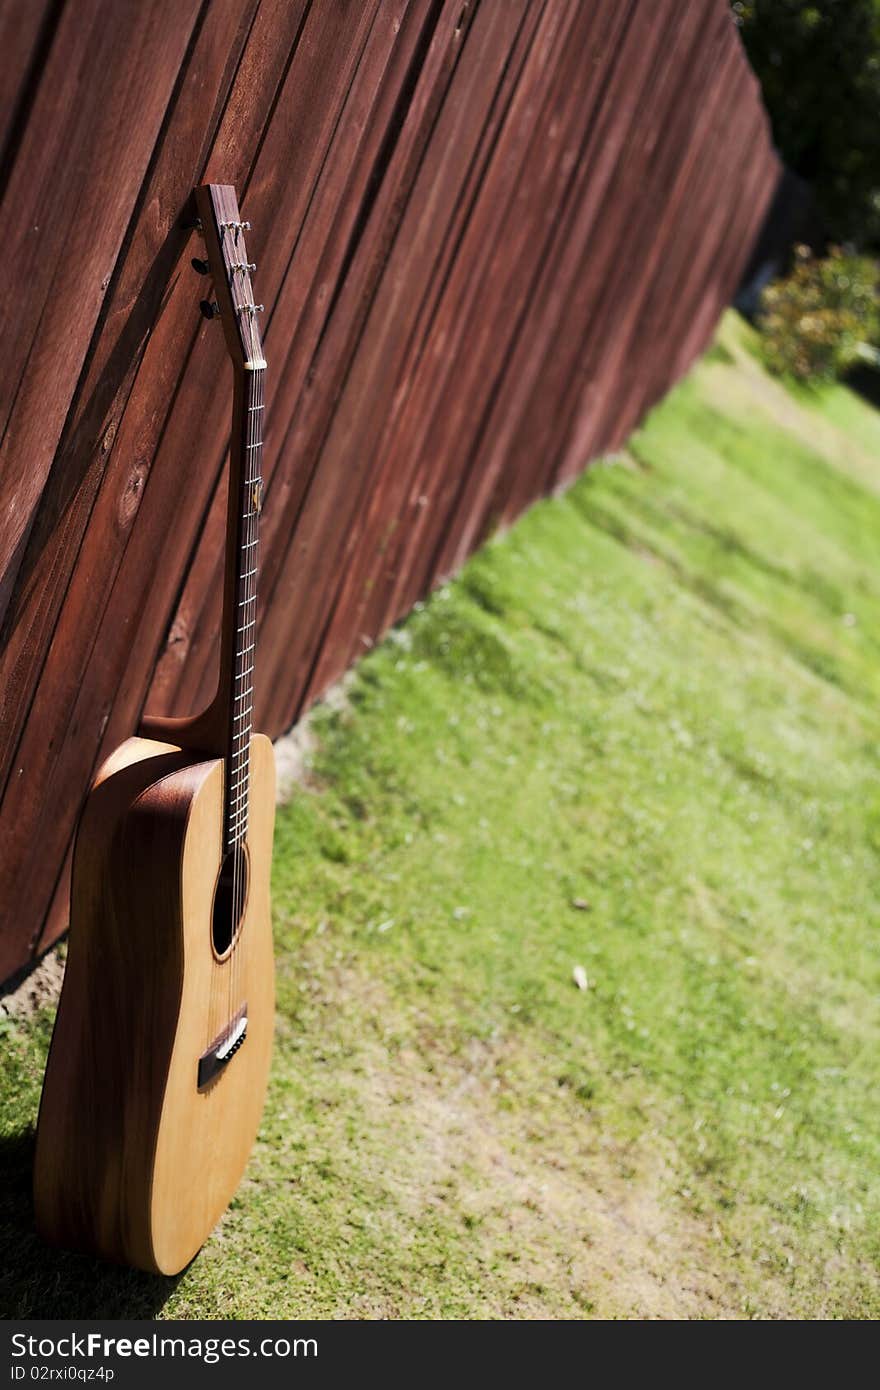 This is a picture of an acoustic guitar against a redwood fence with a long view of the fence. This is a picture of an acoustic guitar against a redwood fence with a long view of the fence..